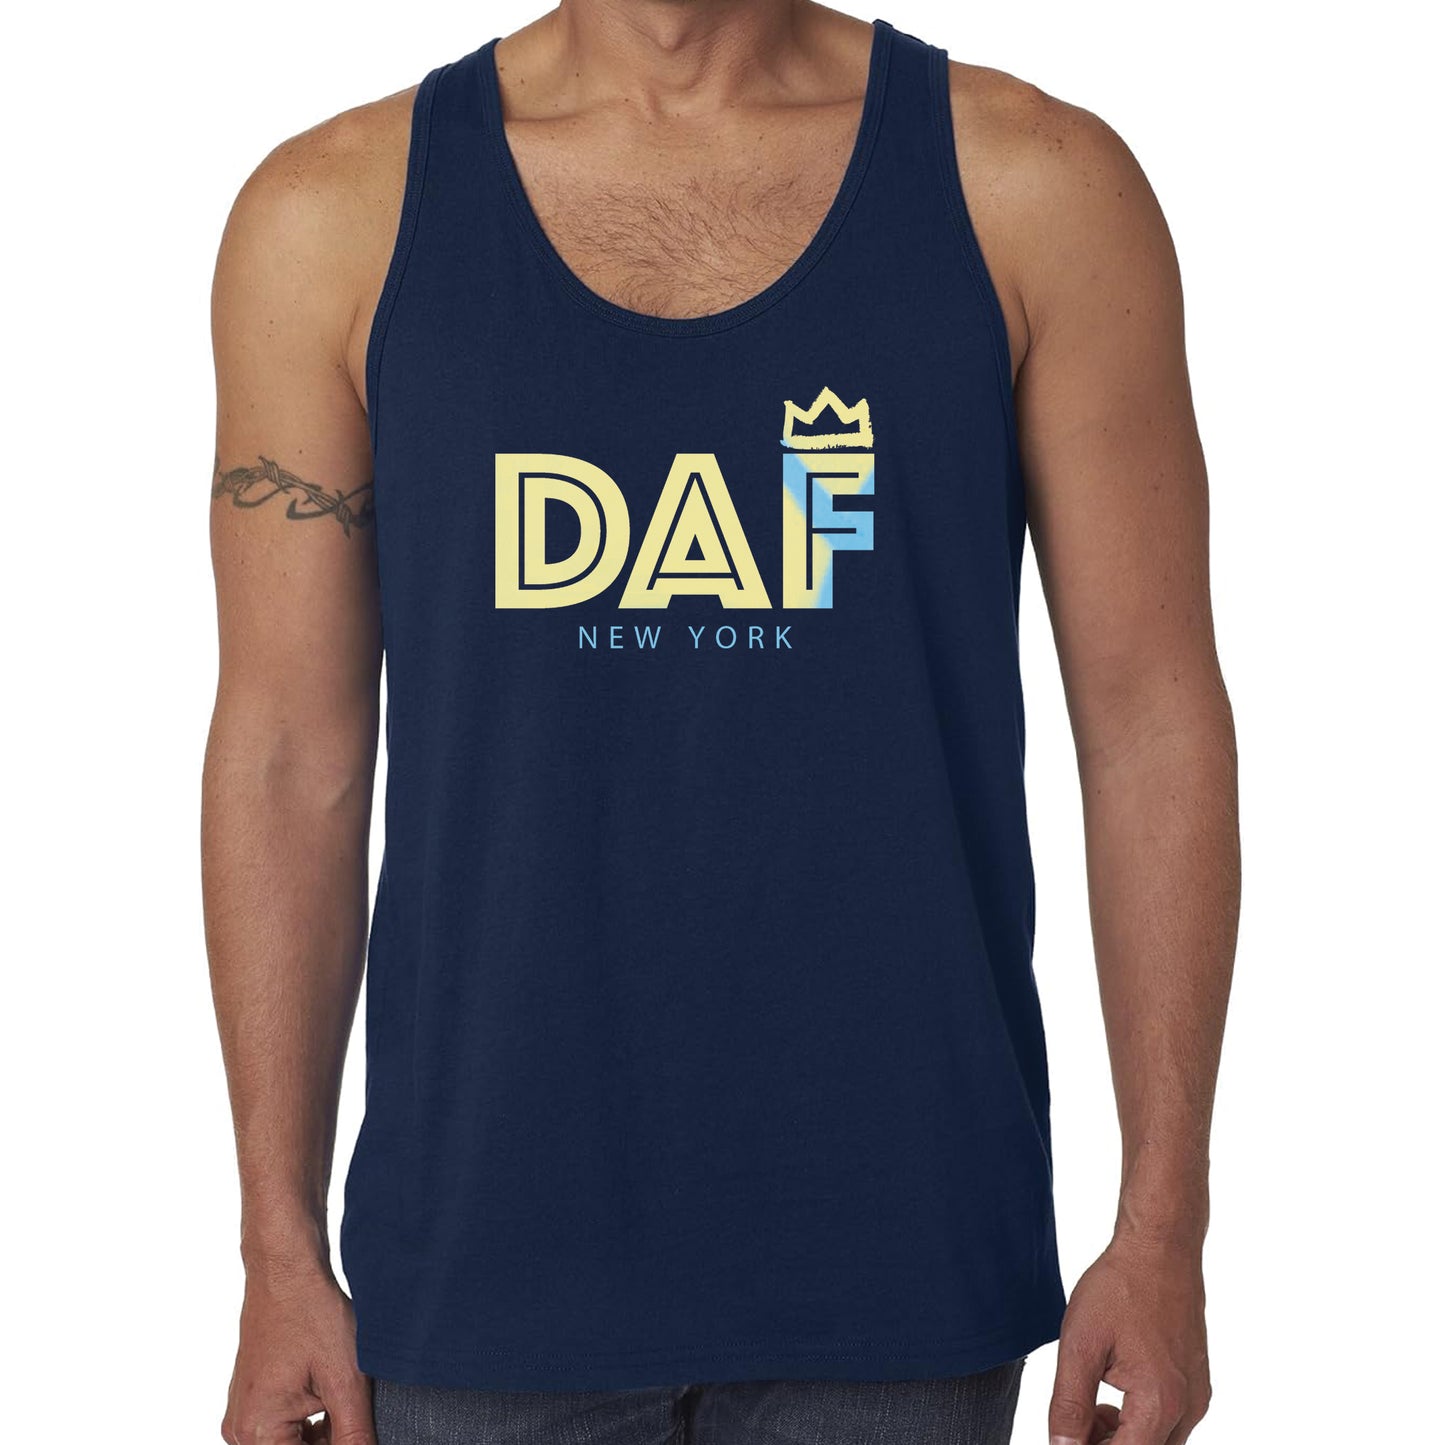 Navy and Yellow Tank